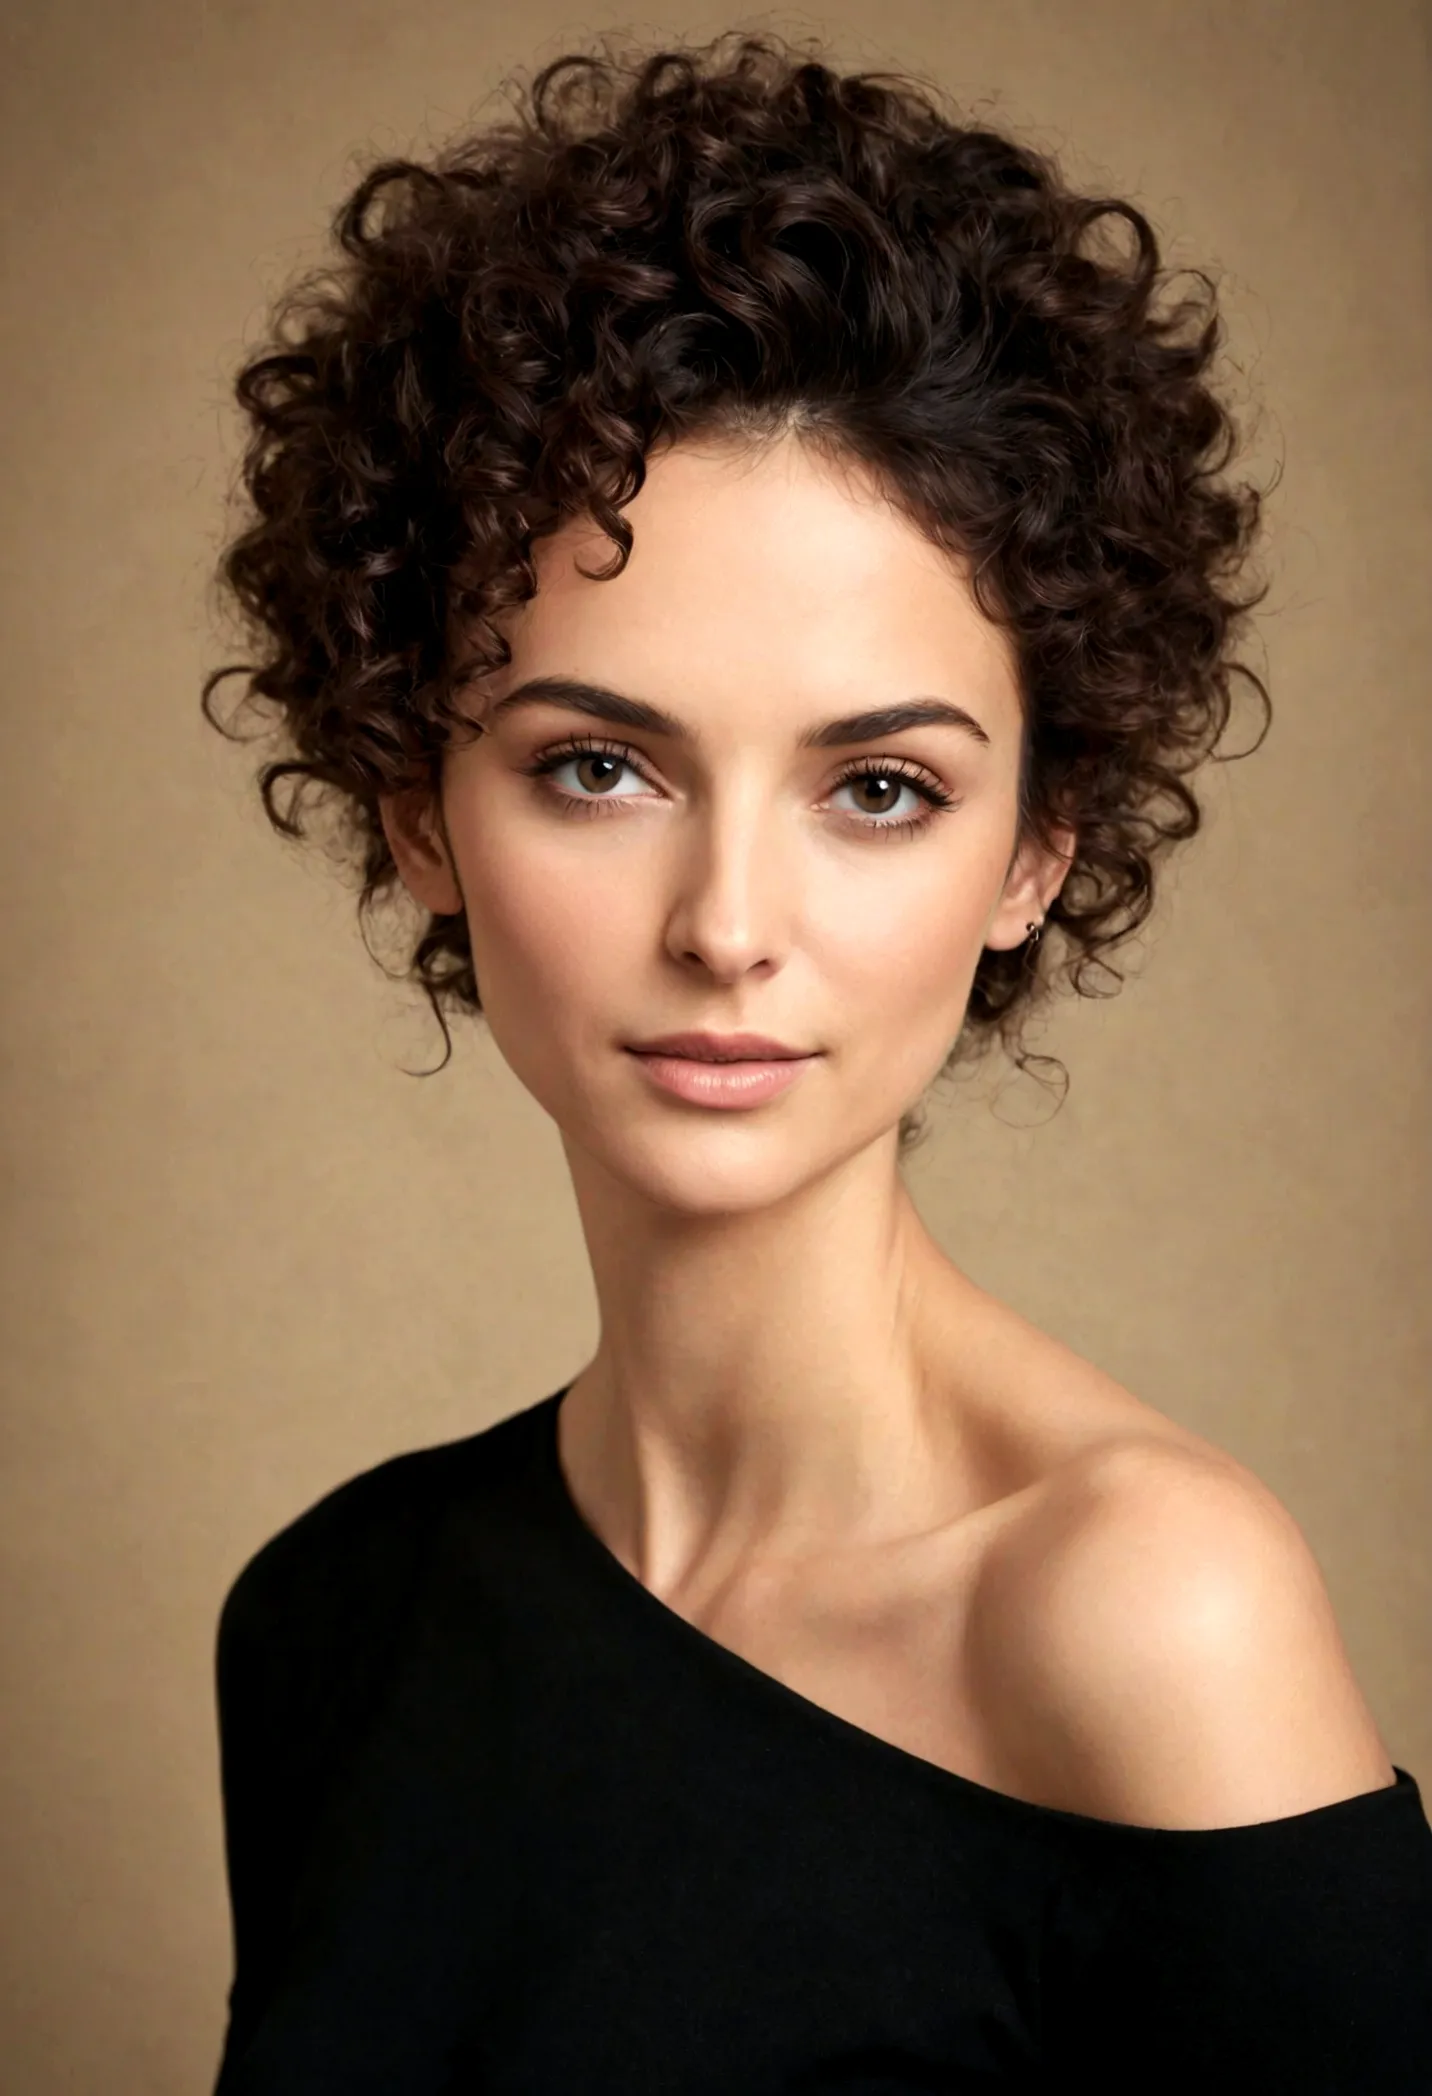 A woman, skin details,large honey eyes, (voluminous, well-defined, dark curly hair. Her curls are large and natural, with signif...